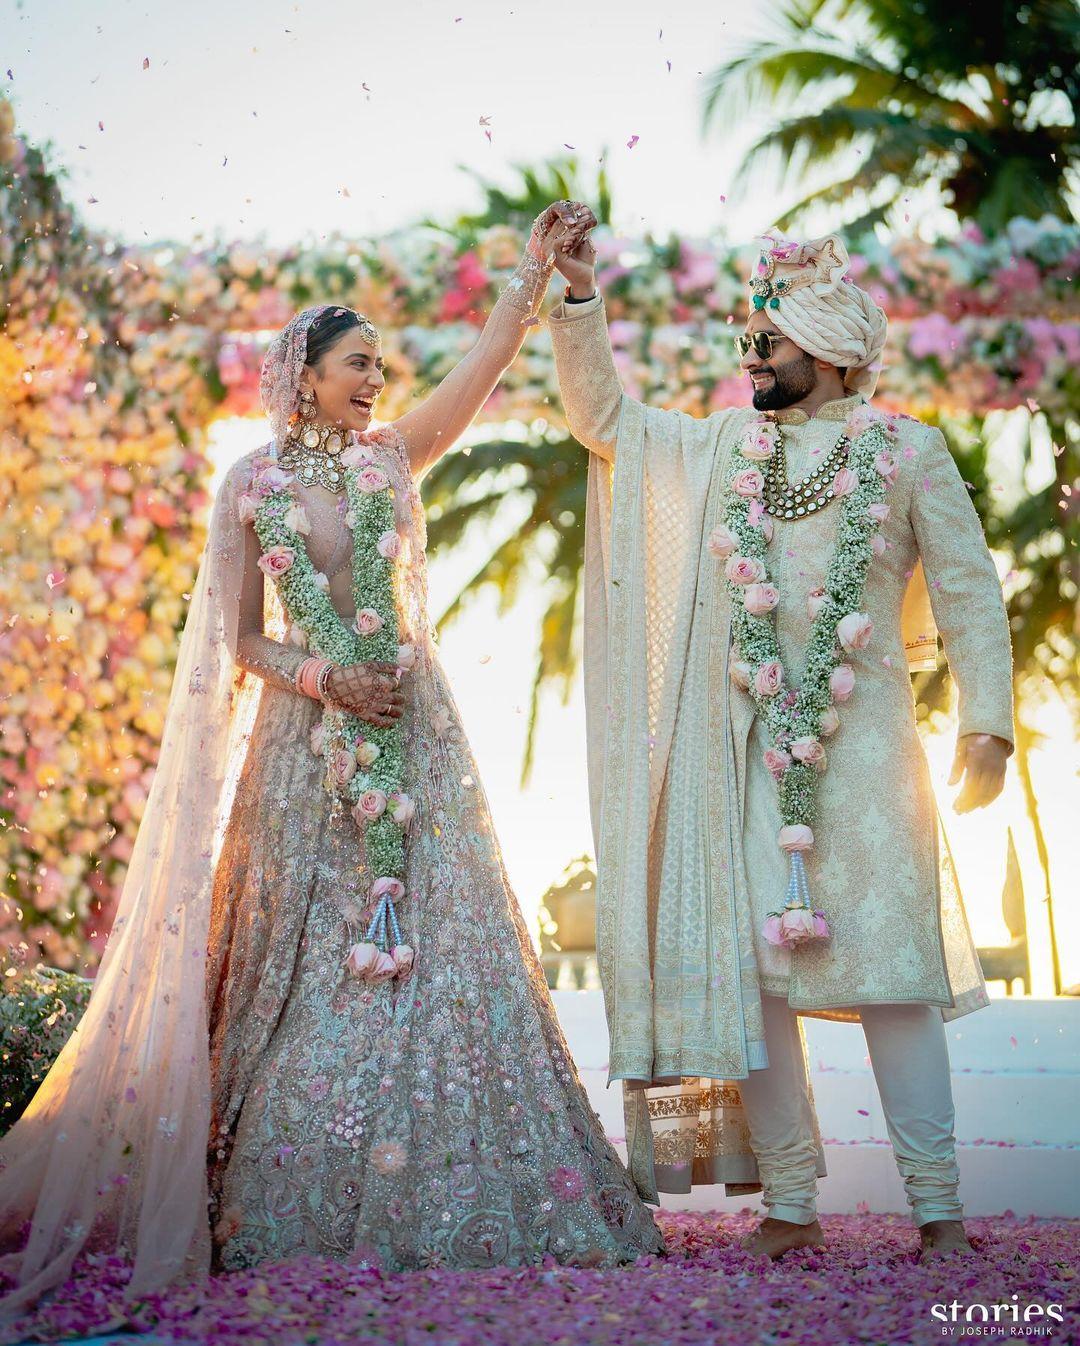 Rakul Preet Singh and Jackky Bhagnani took to their Instagram and shared the first pictures from their wedding. The couple looked stunning in the co-ordinated outfits